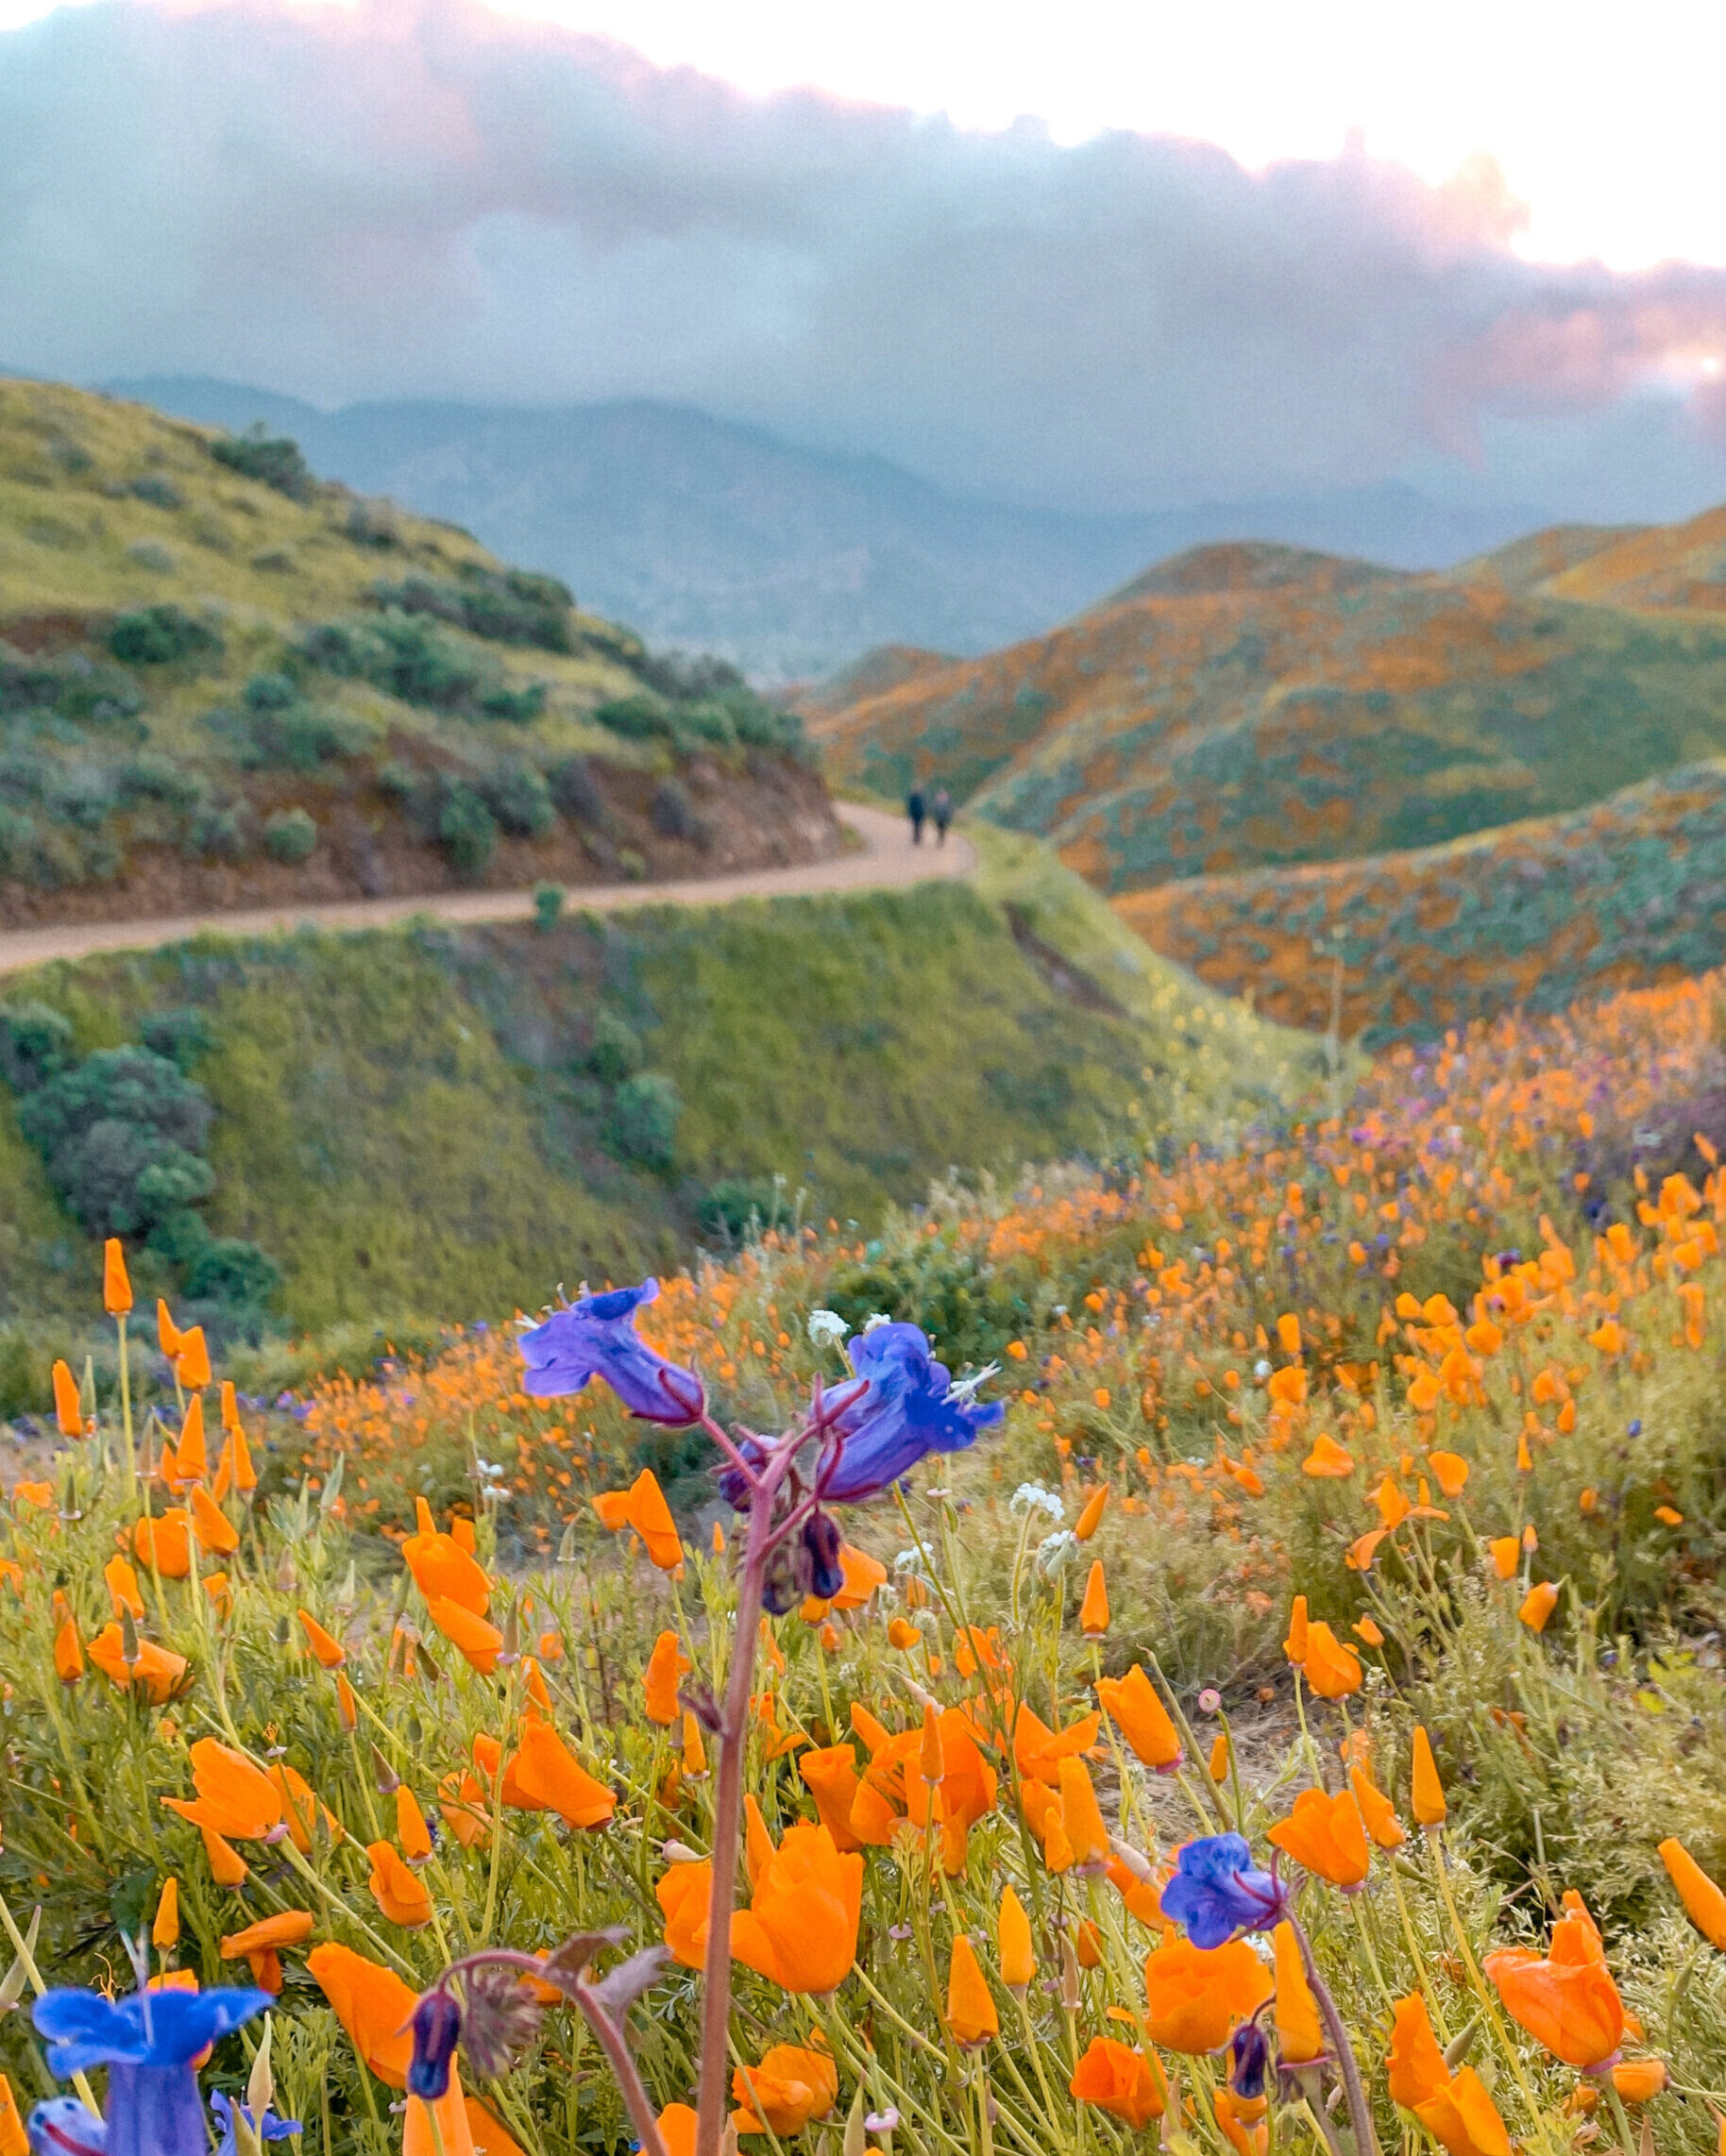 Will there be a super bloom in California 2023?